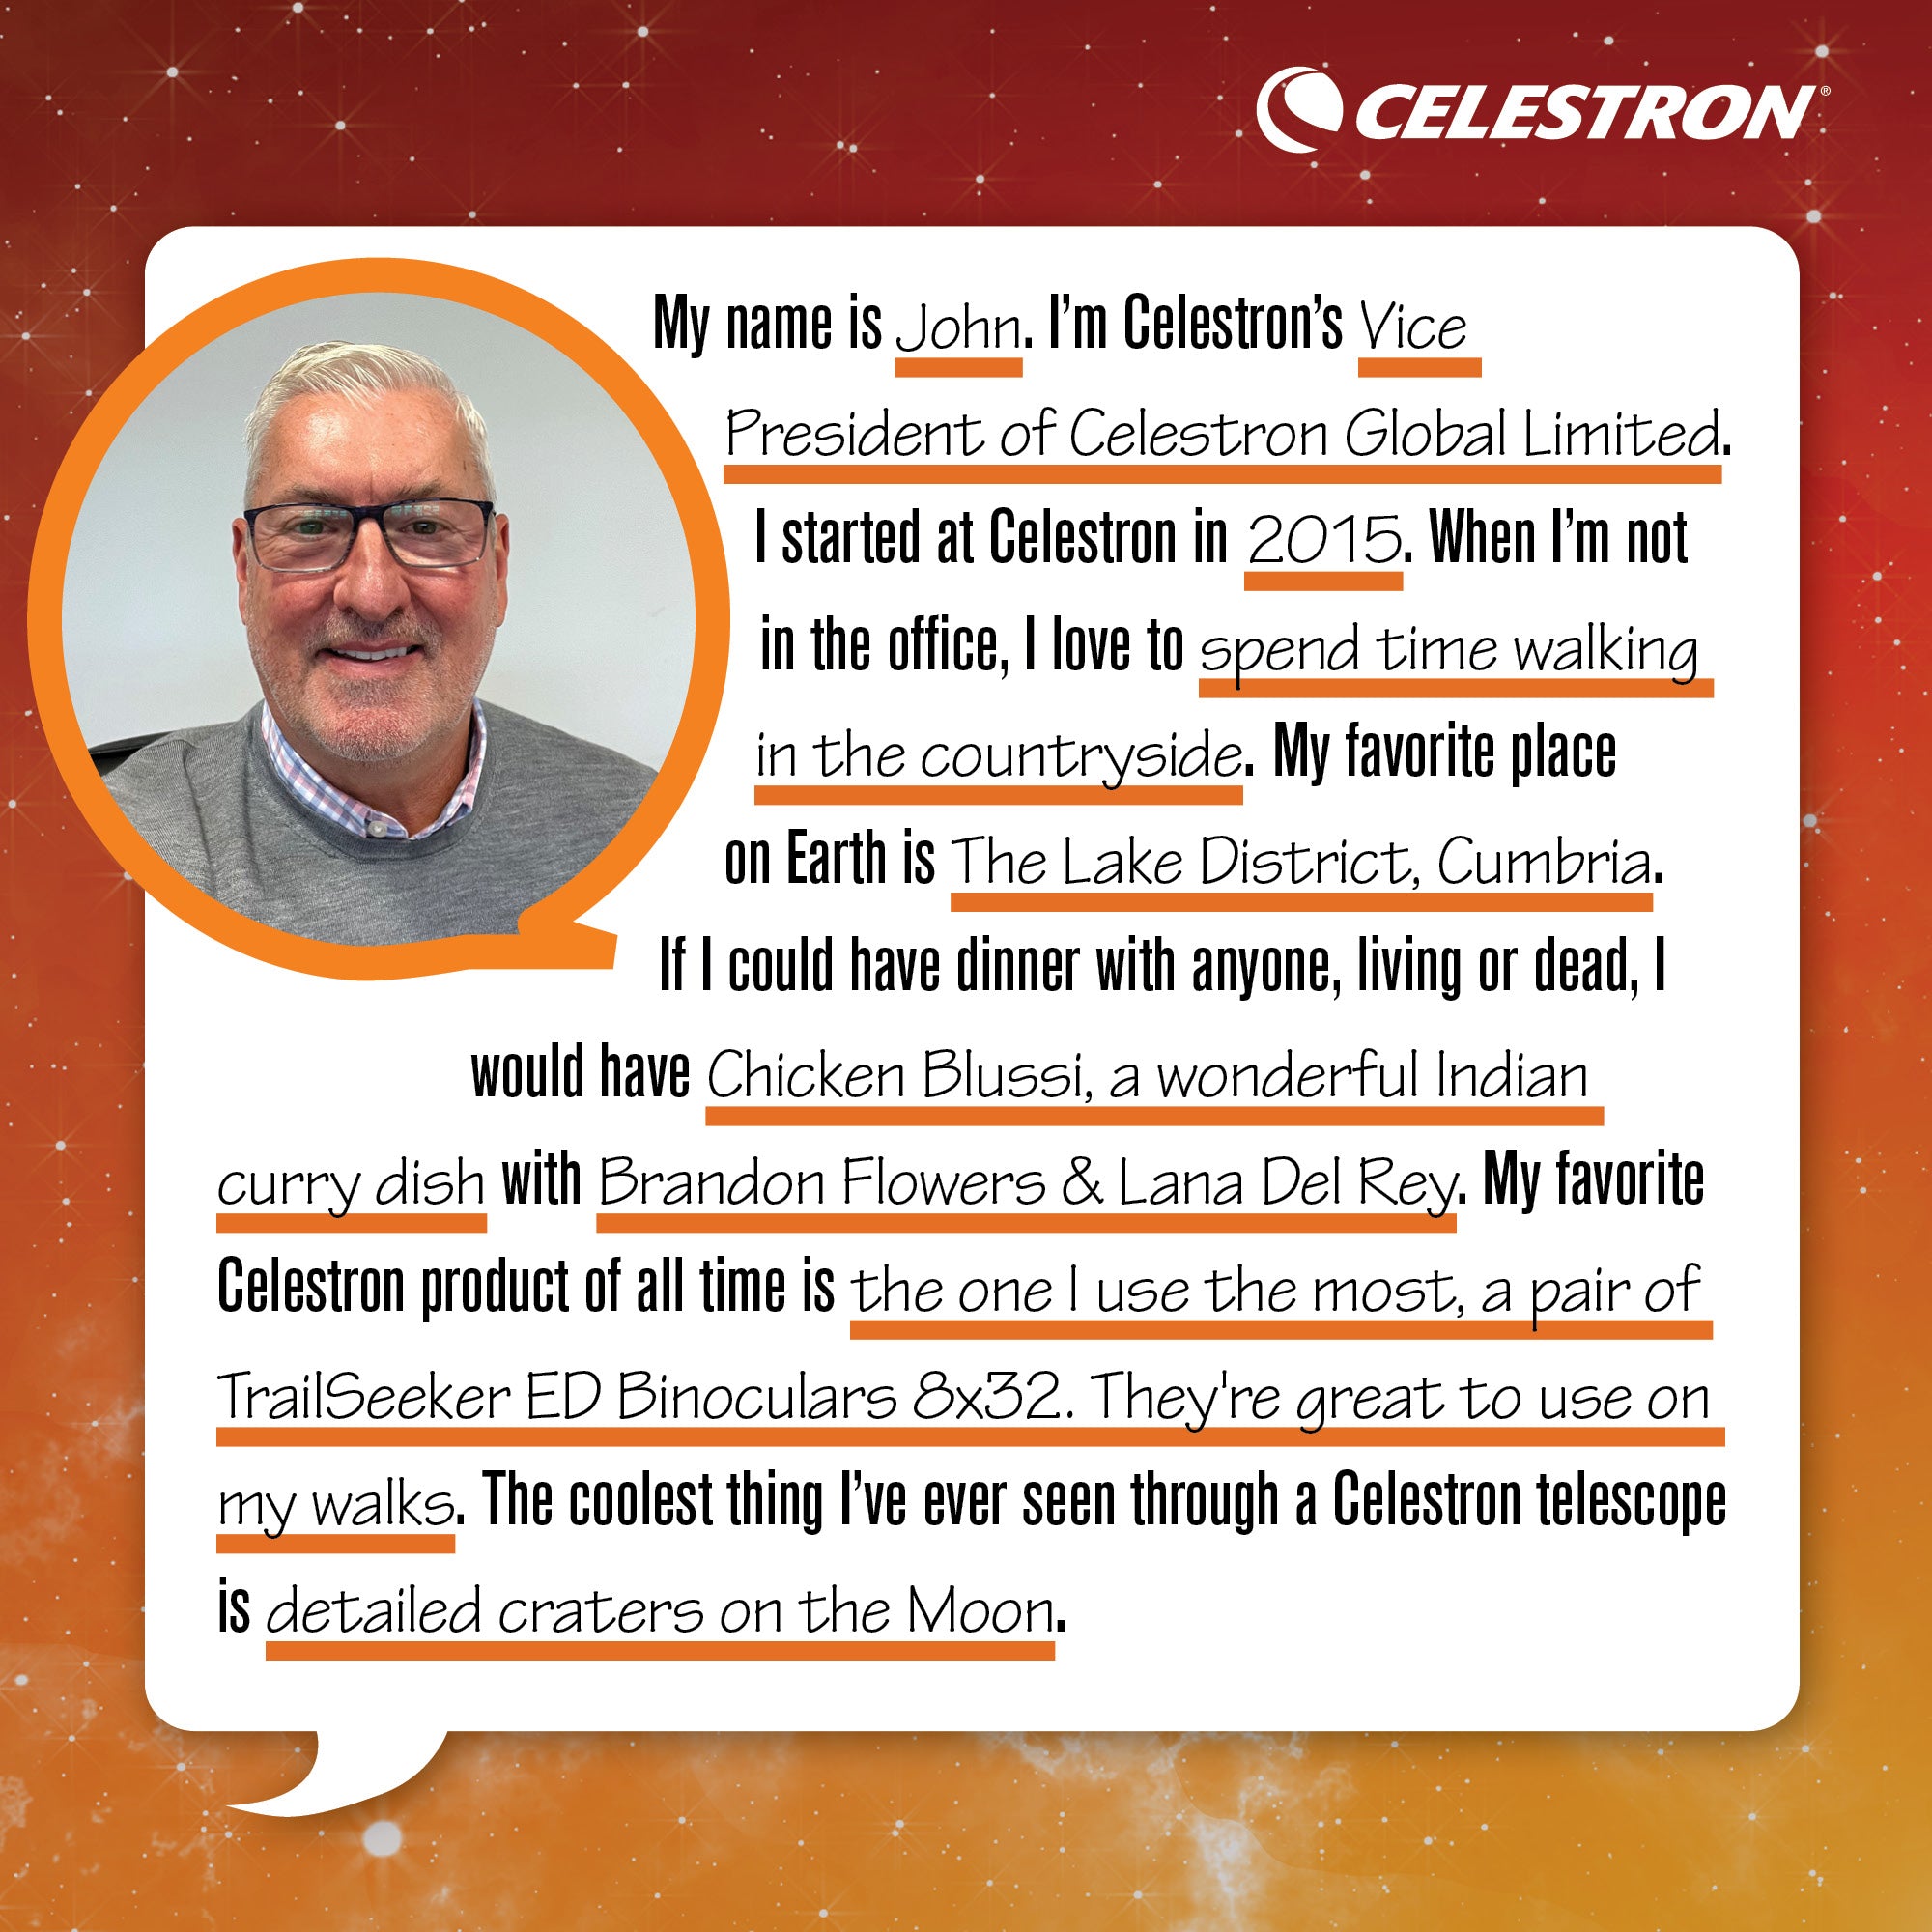 My name is John. I'm Celestron's Vice President of Celestron Global Limited. I started at Celestron in 2015. When I'm not in the office, I love to spend time walking in the countryside.  My favorite place on Earth is The Lake District, Cumbria. If I could have dinner with anyone, living or dead, I would have Chicken Blussi, a wonderful Indian curry dish with Brandon Flowers and Lana Del Rey. My favorite Celestron product of all time is the one I use the most, a pair of TrailSeeker ED 8x32mm Binoculars. They're great to use on my walks. The coolest thing I've ever seen through a Celestron telescope is detailed craters on the Moon.